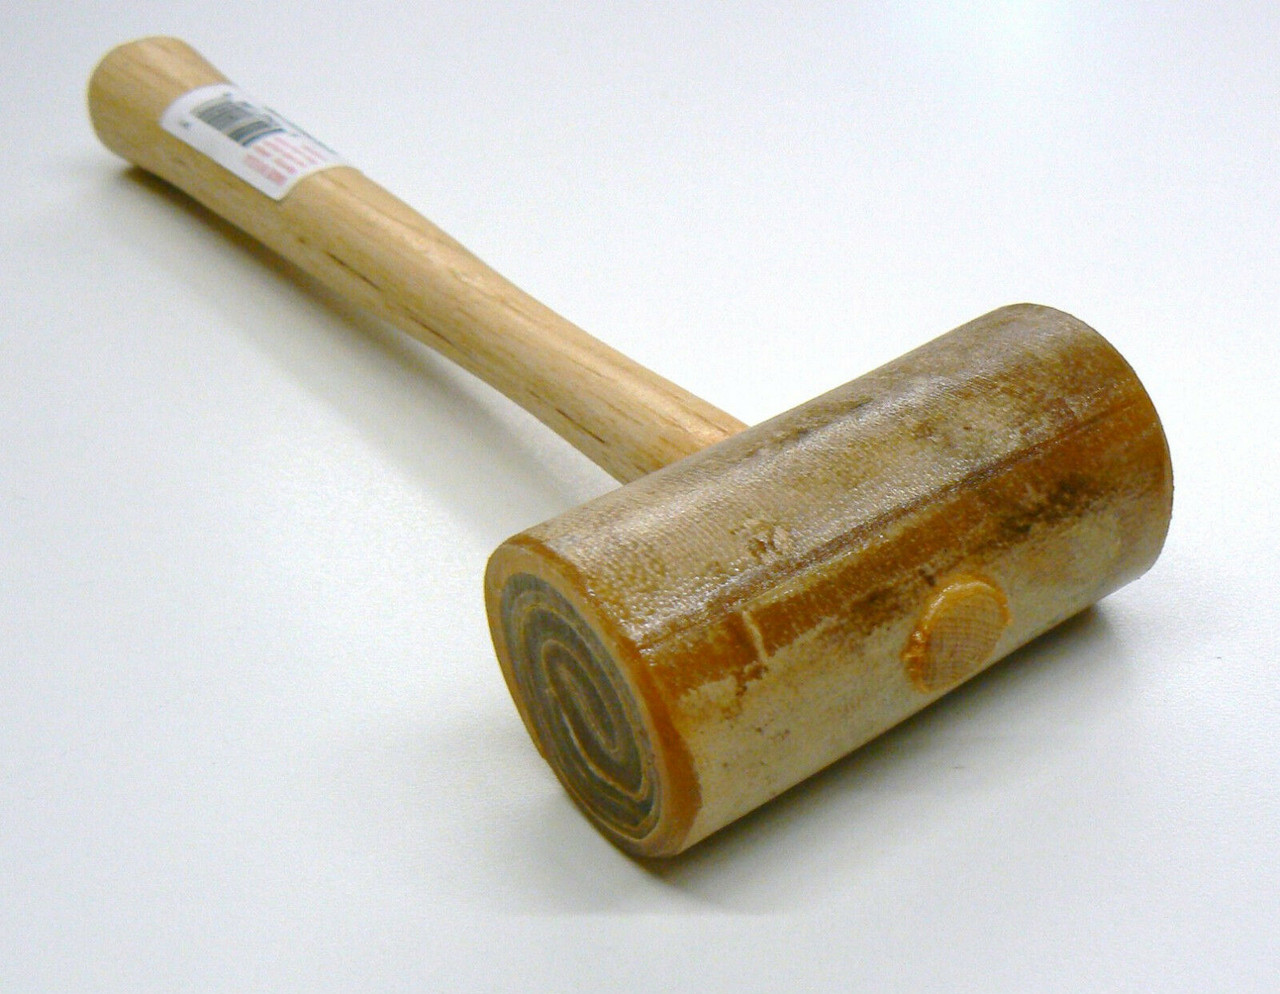 Weighted Rawhide Mallets - 16 oz.